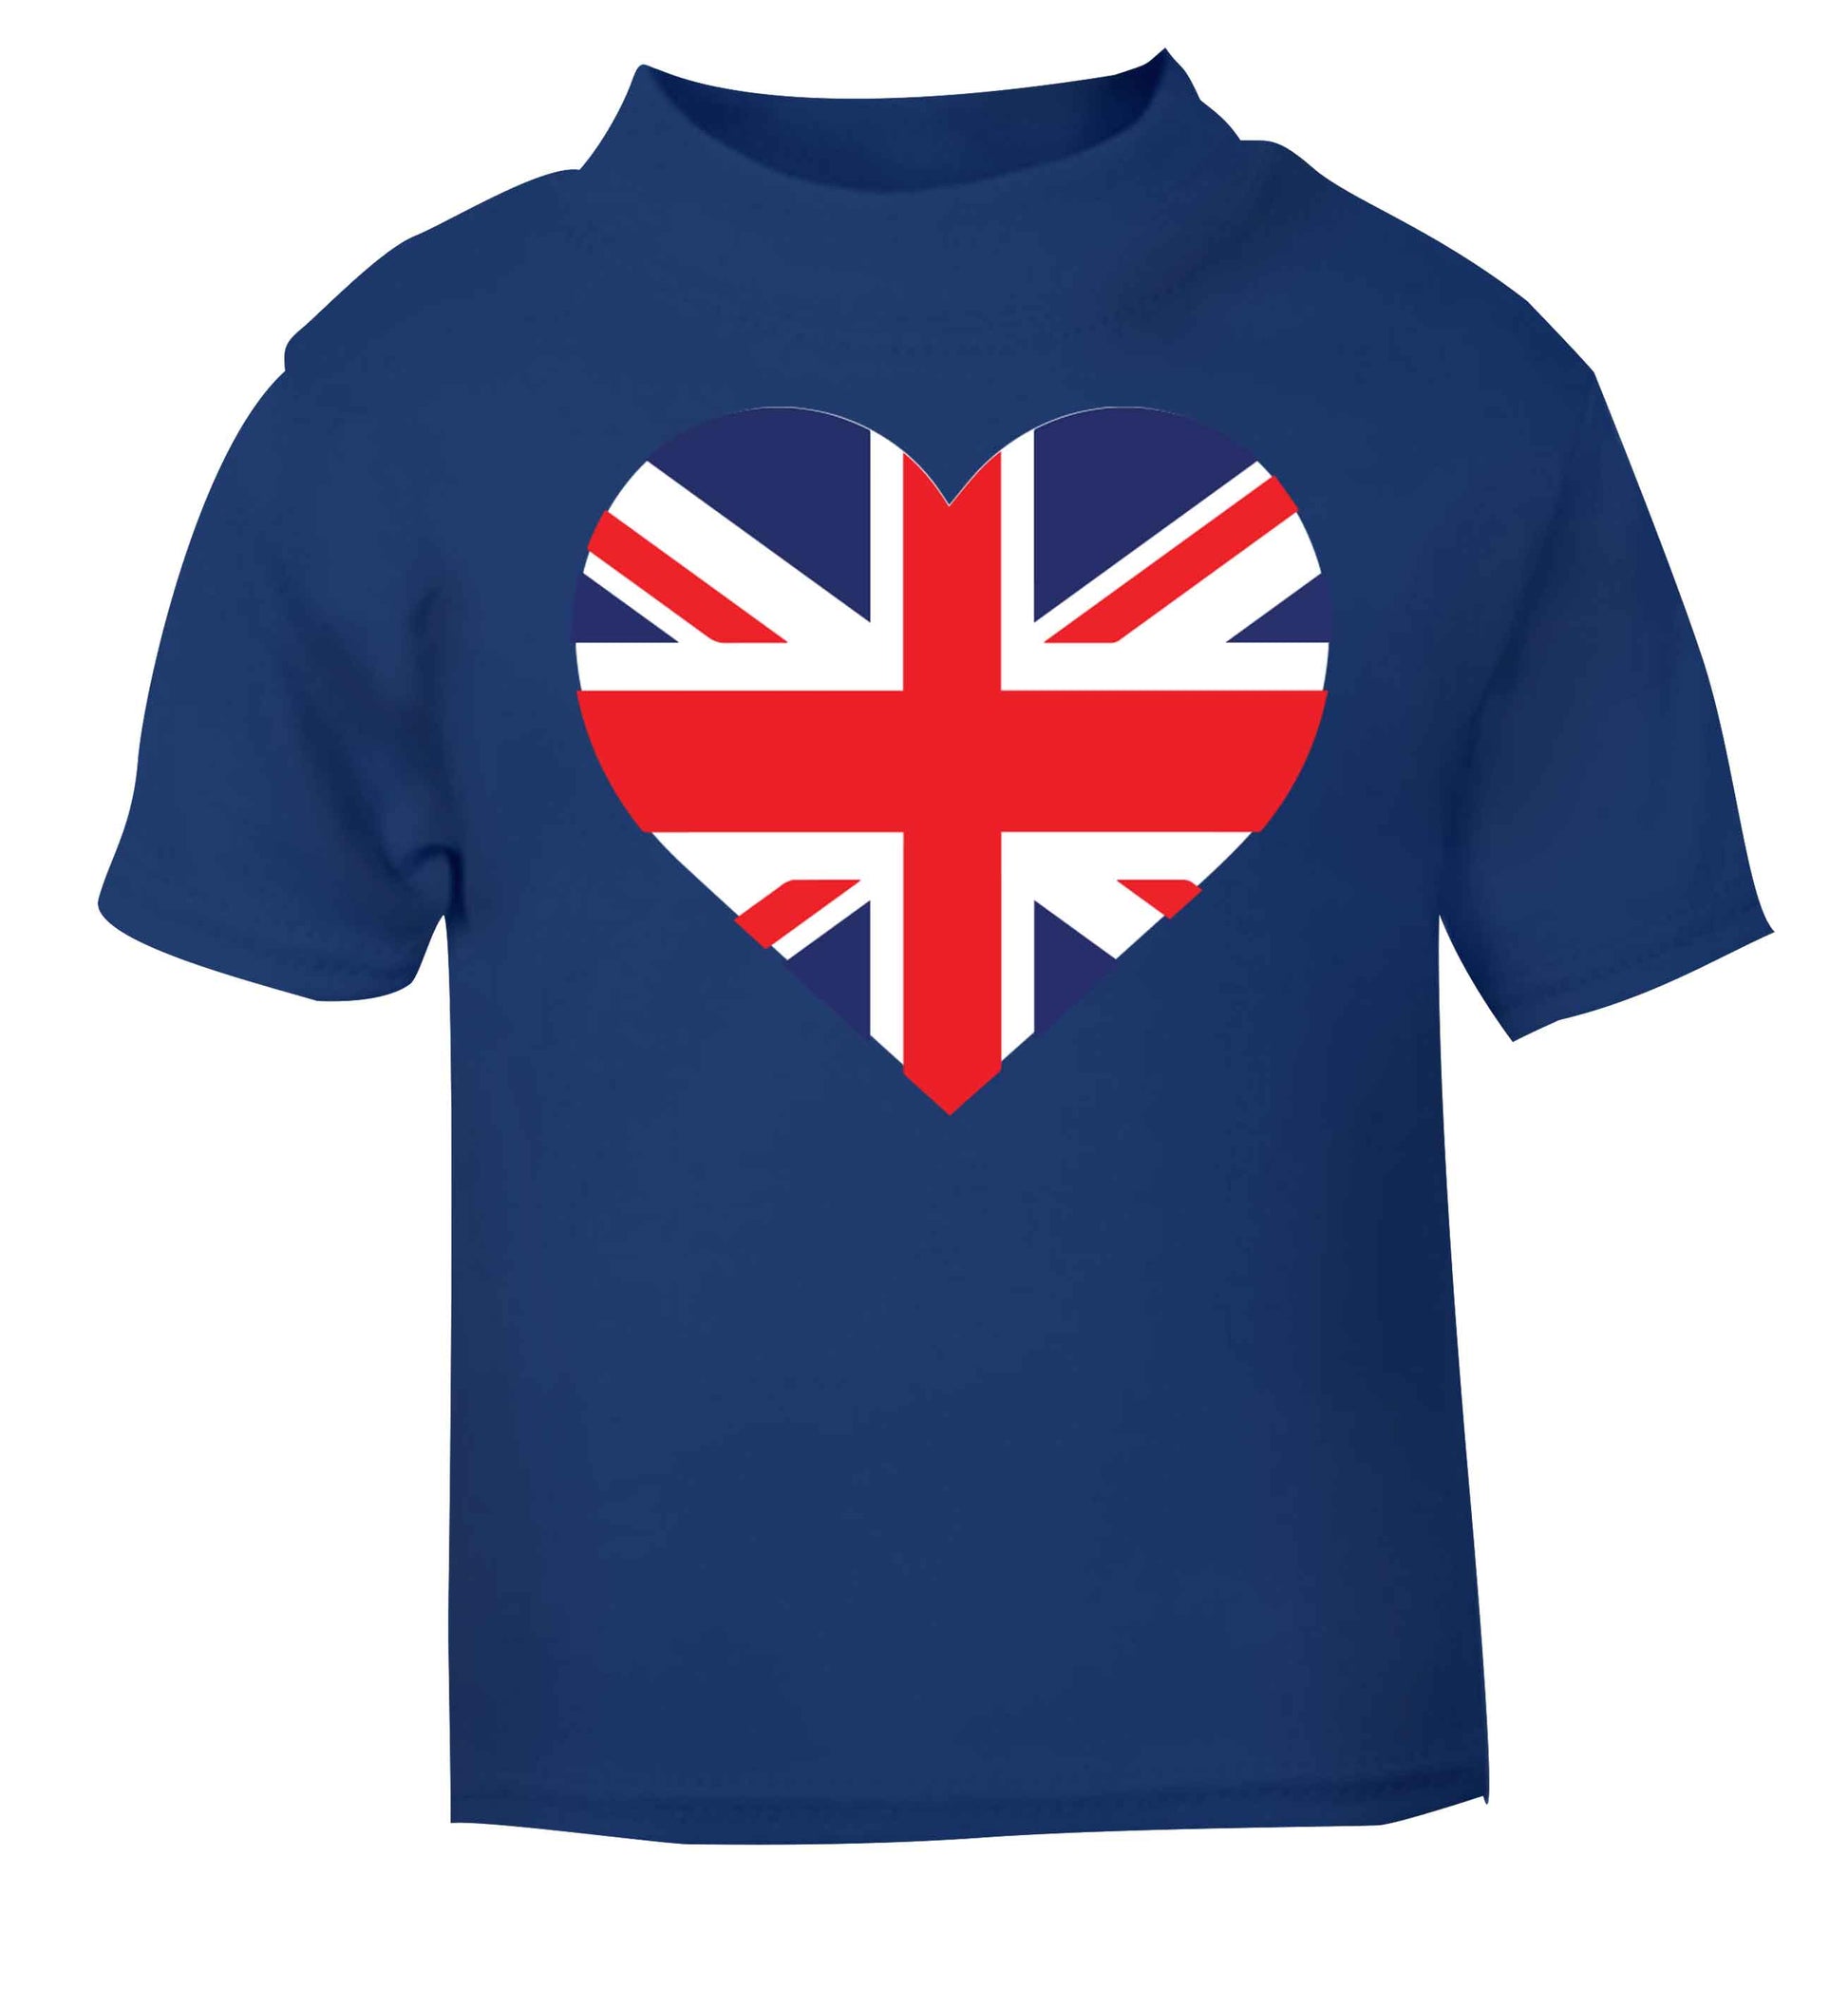 Union Jack Heart blue baby toddler Tshirt 2 Years